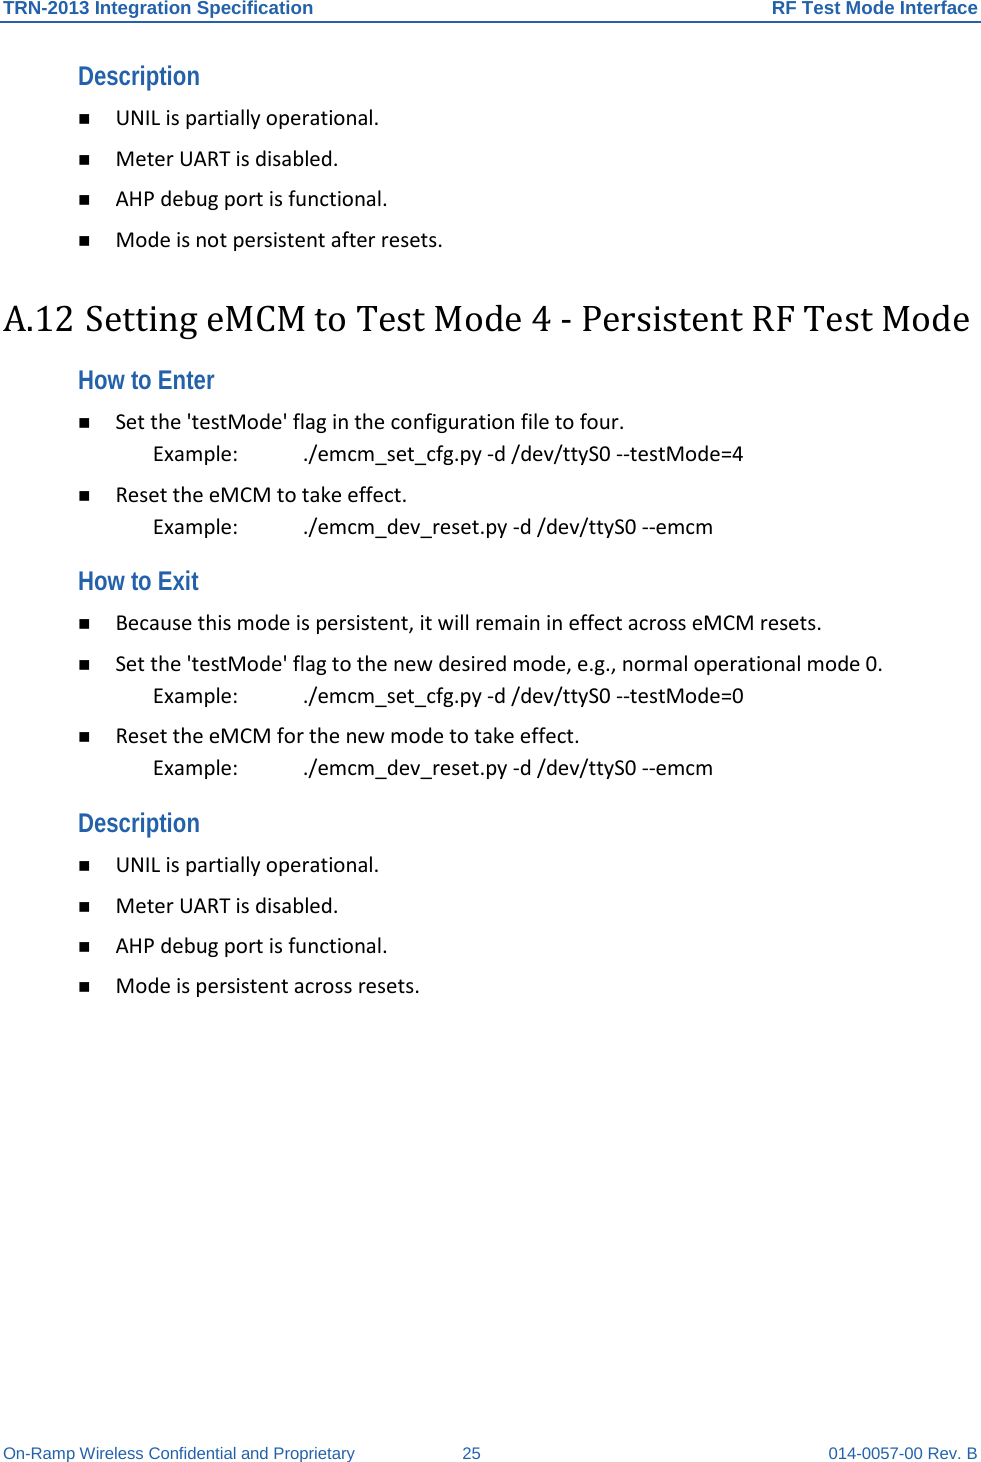 TRN-2013 Integration Specification RF Test Mode Interface On-Ramp Wireless Confidential and Proprietary 25 014-0057-00 Rev. B Description   UNIL is partially operational.   Meter UART is disabled.   AHP debug port is functional.   Mode is not persistent after resets.  A.12 Setting eMCM to Test Mode 4 - Persistent RF Test Mode How to Enter   Set the &apos;testMode&apos; flag in the configuration file to four.  Example:    ./emcm_set_cfg.py -d /dev/ttyS0 --testMode=4   Reset the eMCM to take effect.  Example:    ./emcm_dev_reset.py -d /dev/ttyS0 --emcm  How to Exit   Because this mode is persistent, it will remain in effect across eMCM resets.   Set the &apos;testMode&apos; flag to the new desired mode, e.g., normal operational mode 0.  Example:  ./emcm_set_cfg.py -d /dev/ttyS0 --testMode=0   Reset the eMCM for the new mode to take effect.  Example:  ./emcm_dev_reset.py -d /dev/ttyS0 --emcm  Description   UNIL is partially operational.   Meter UART is disabled.   AHP debug port is functional.   Mode is persistent across resets.   